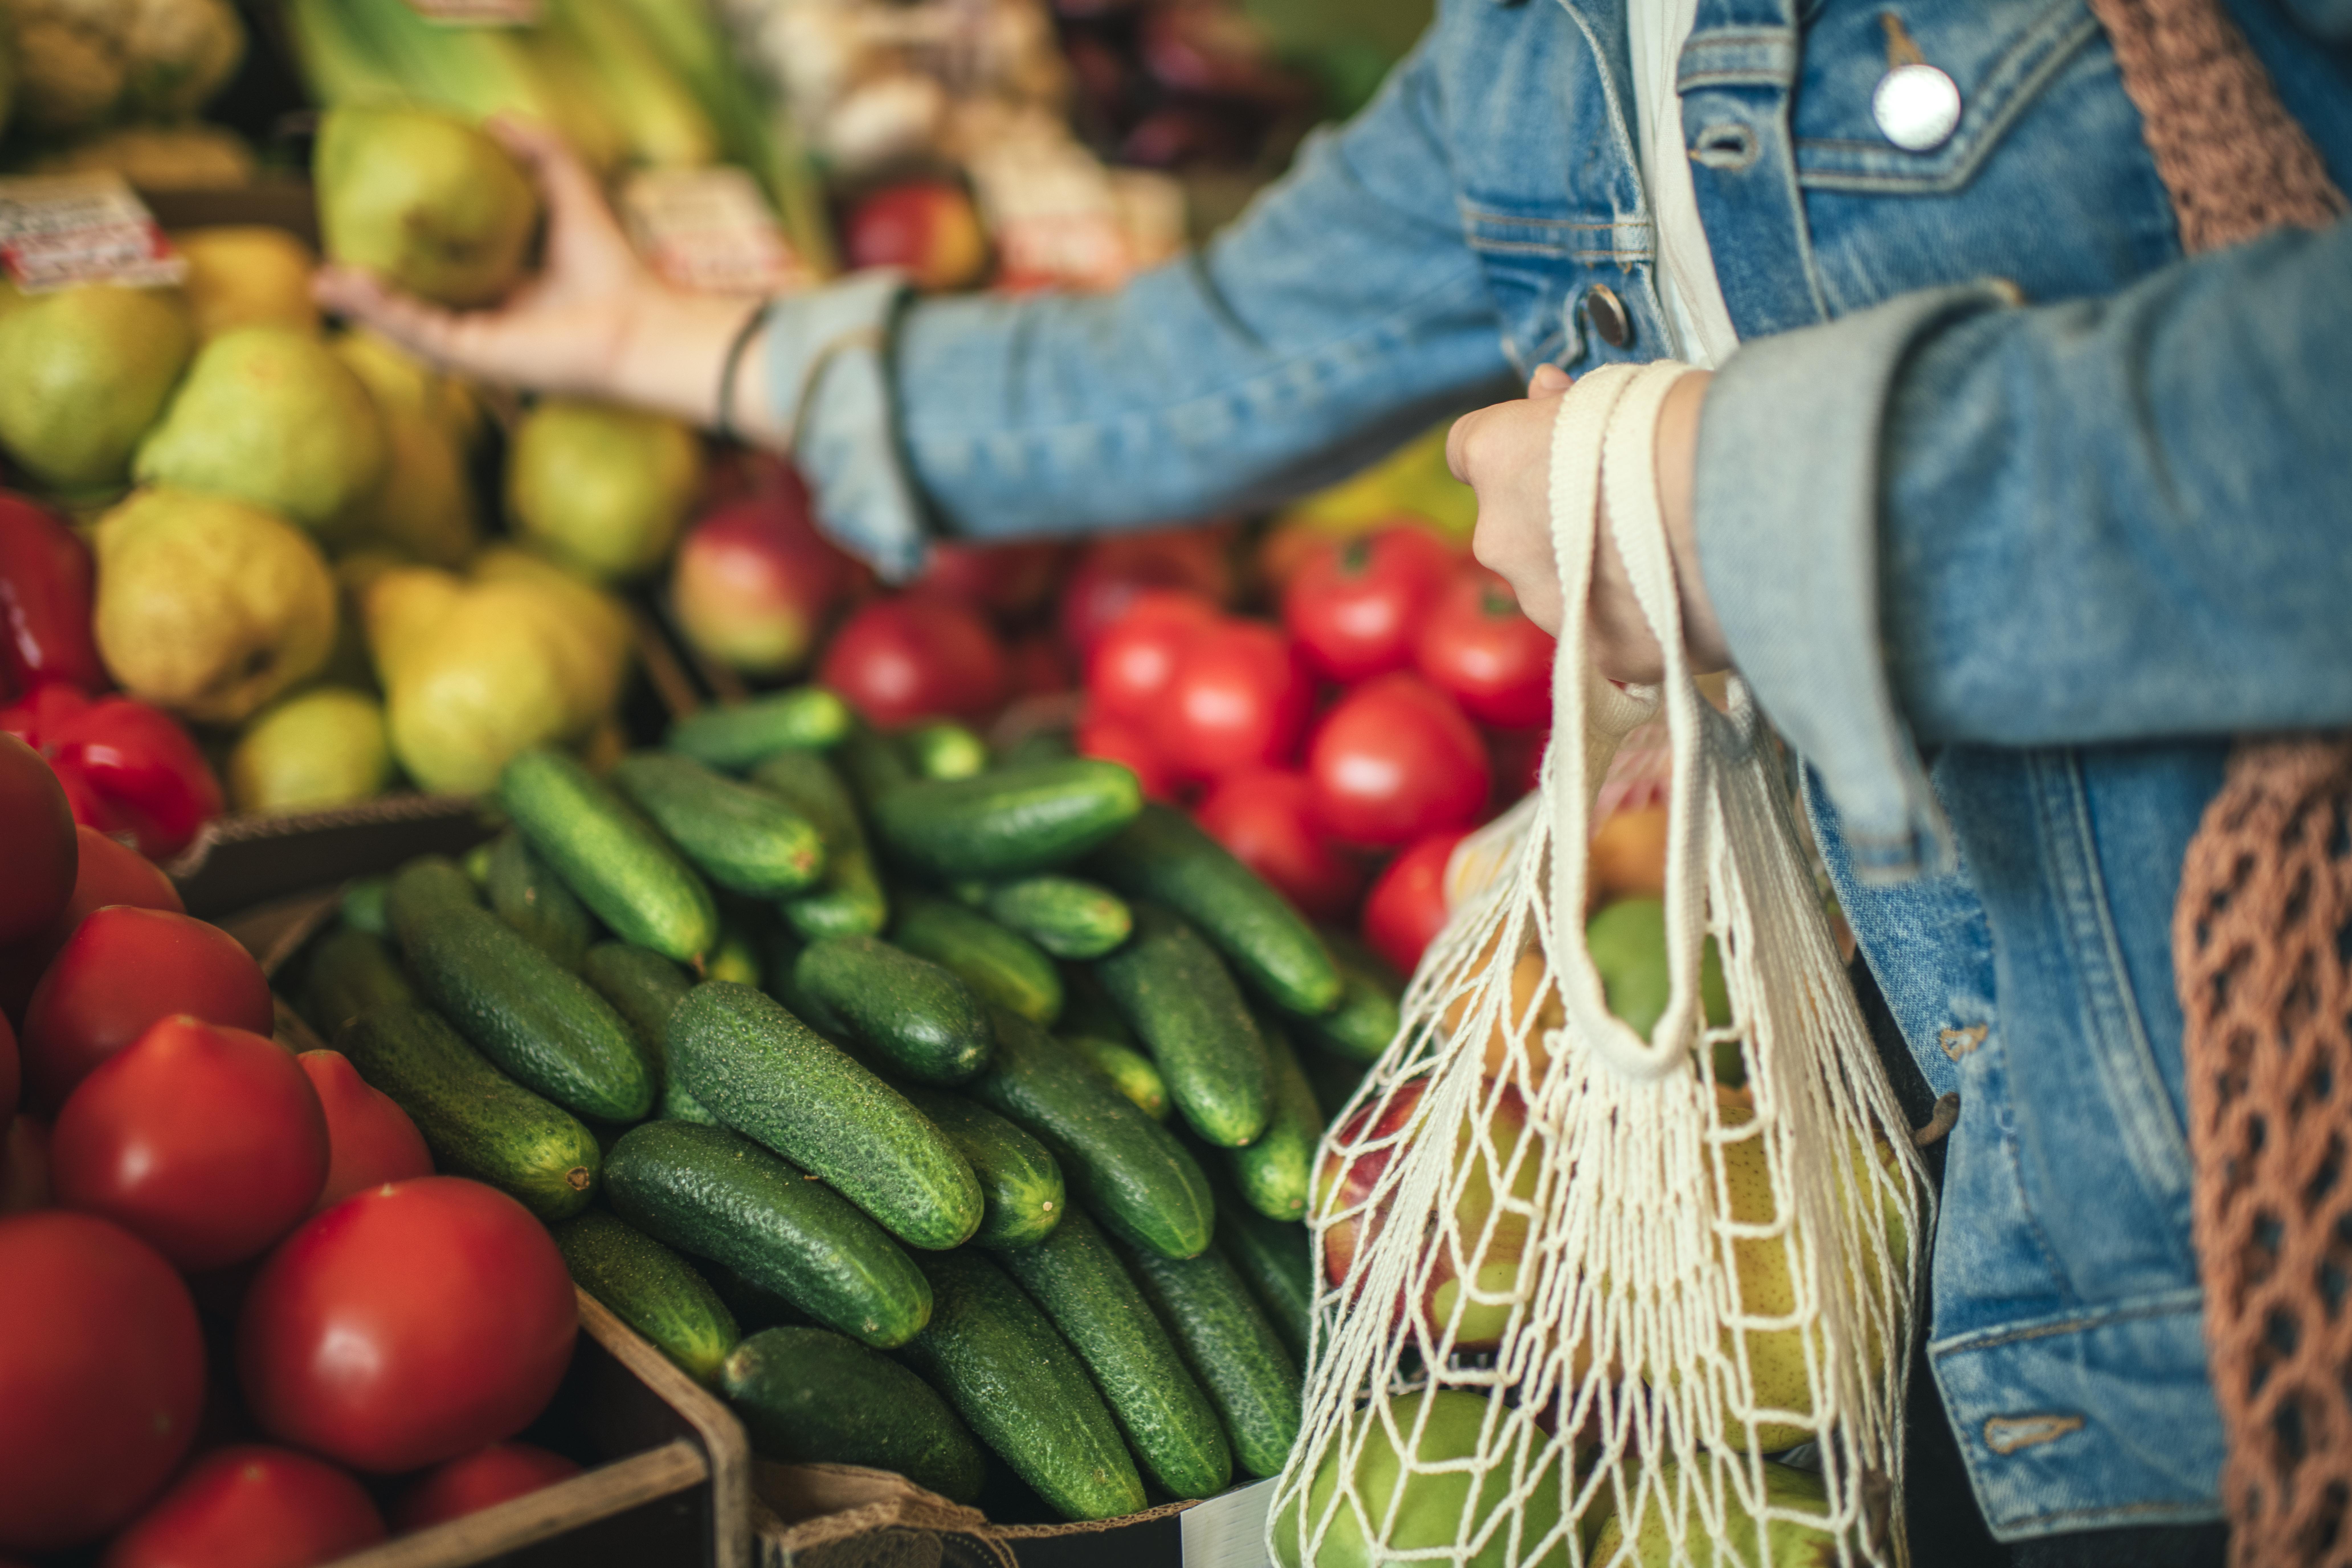 Person at a farmers market selecting fruits and vegetables using a reusable bag